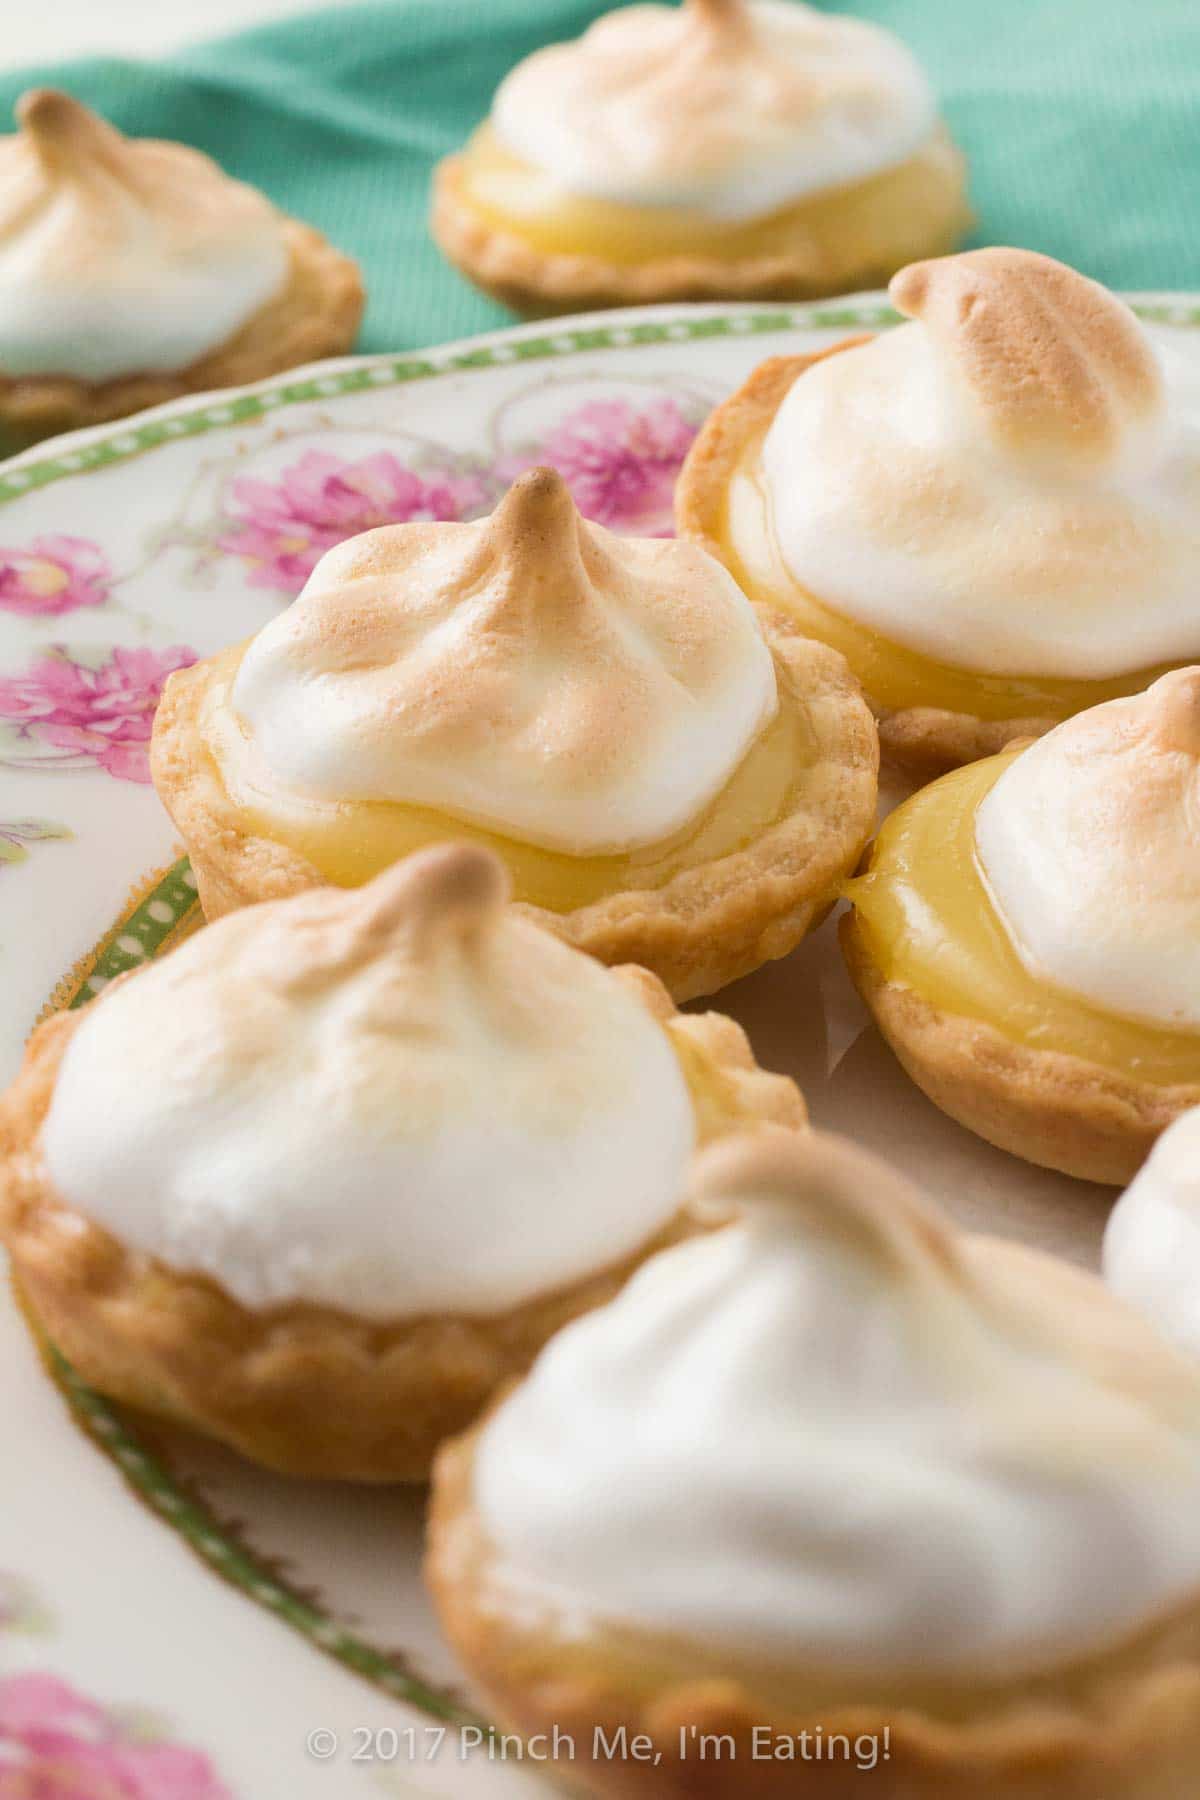 These bite-sized mini lemon meringue pies are a charming and adorable dessert for a springtime or Mother's Day tea party! You can use homemade or store-bought lemon curd. | How to use lemon curd | Mother's Day desserts | Afternoon tea desserts | Afternoon tea recipes